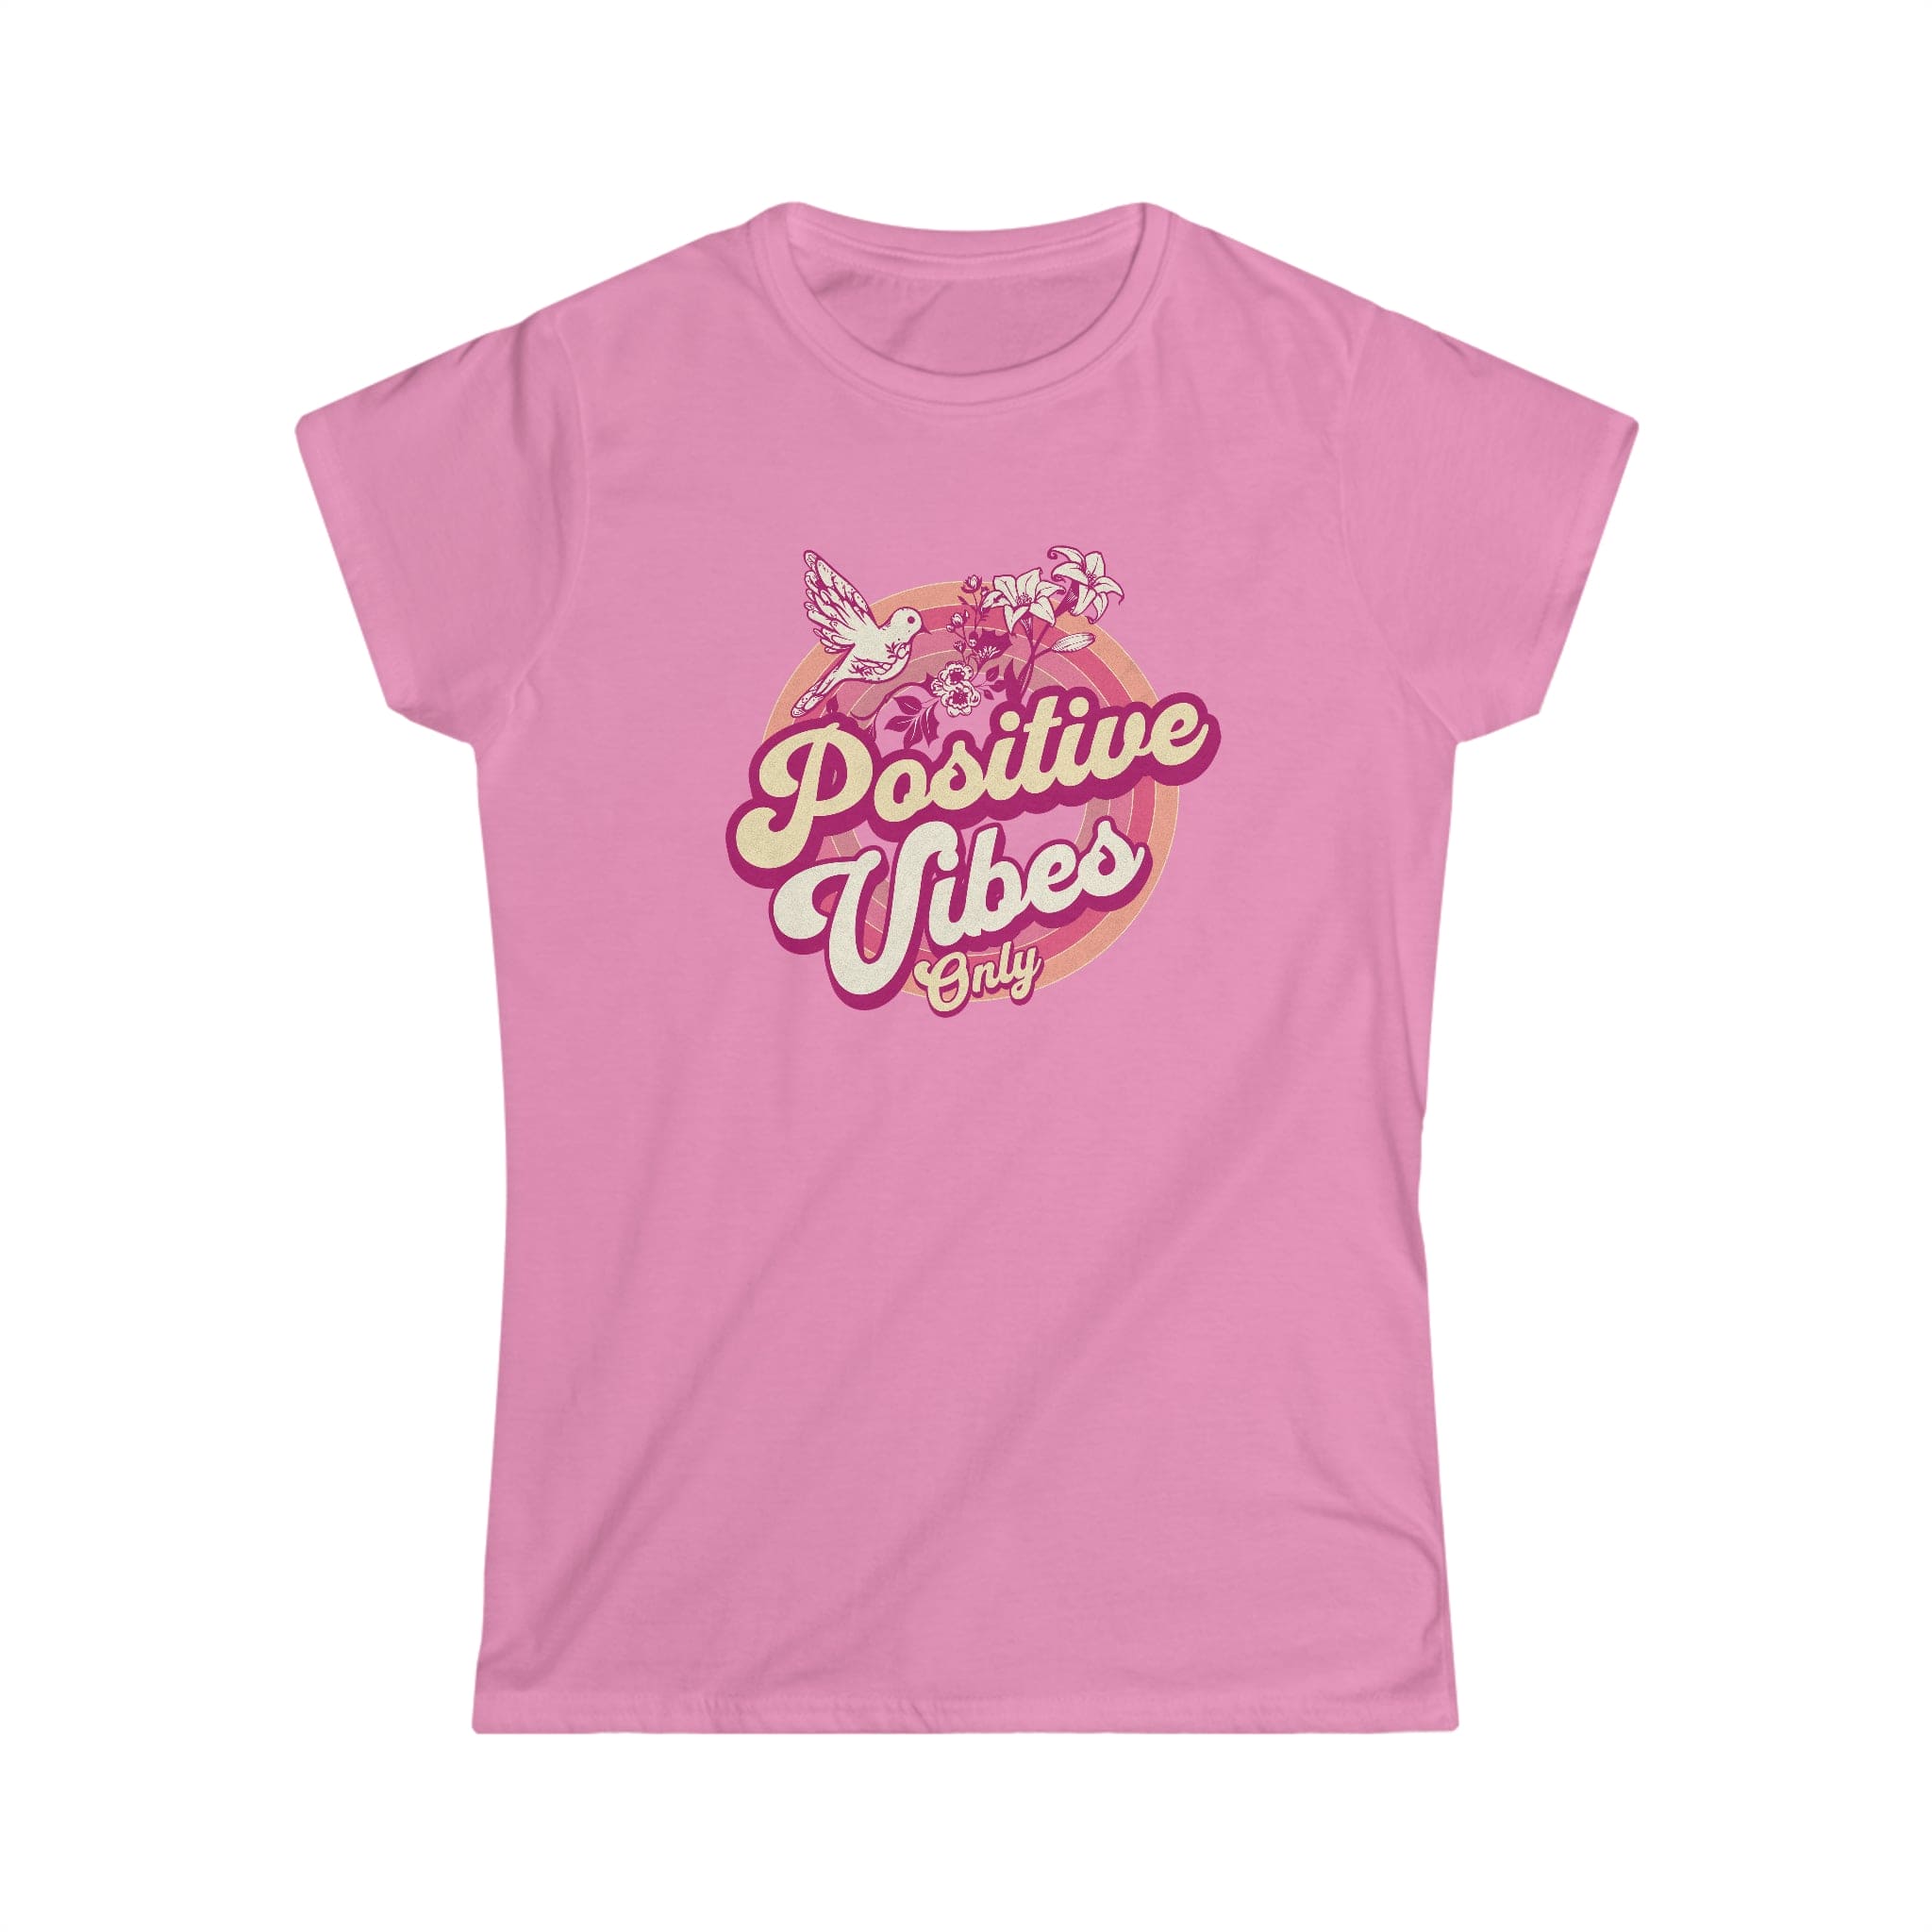 Positive Vibes Only - Women's Softstyle Tee